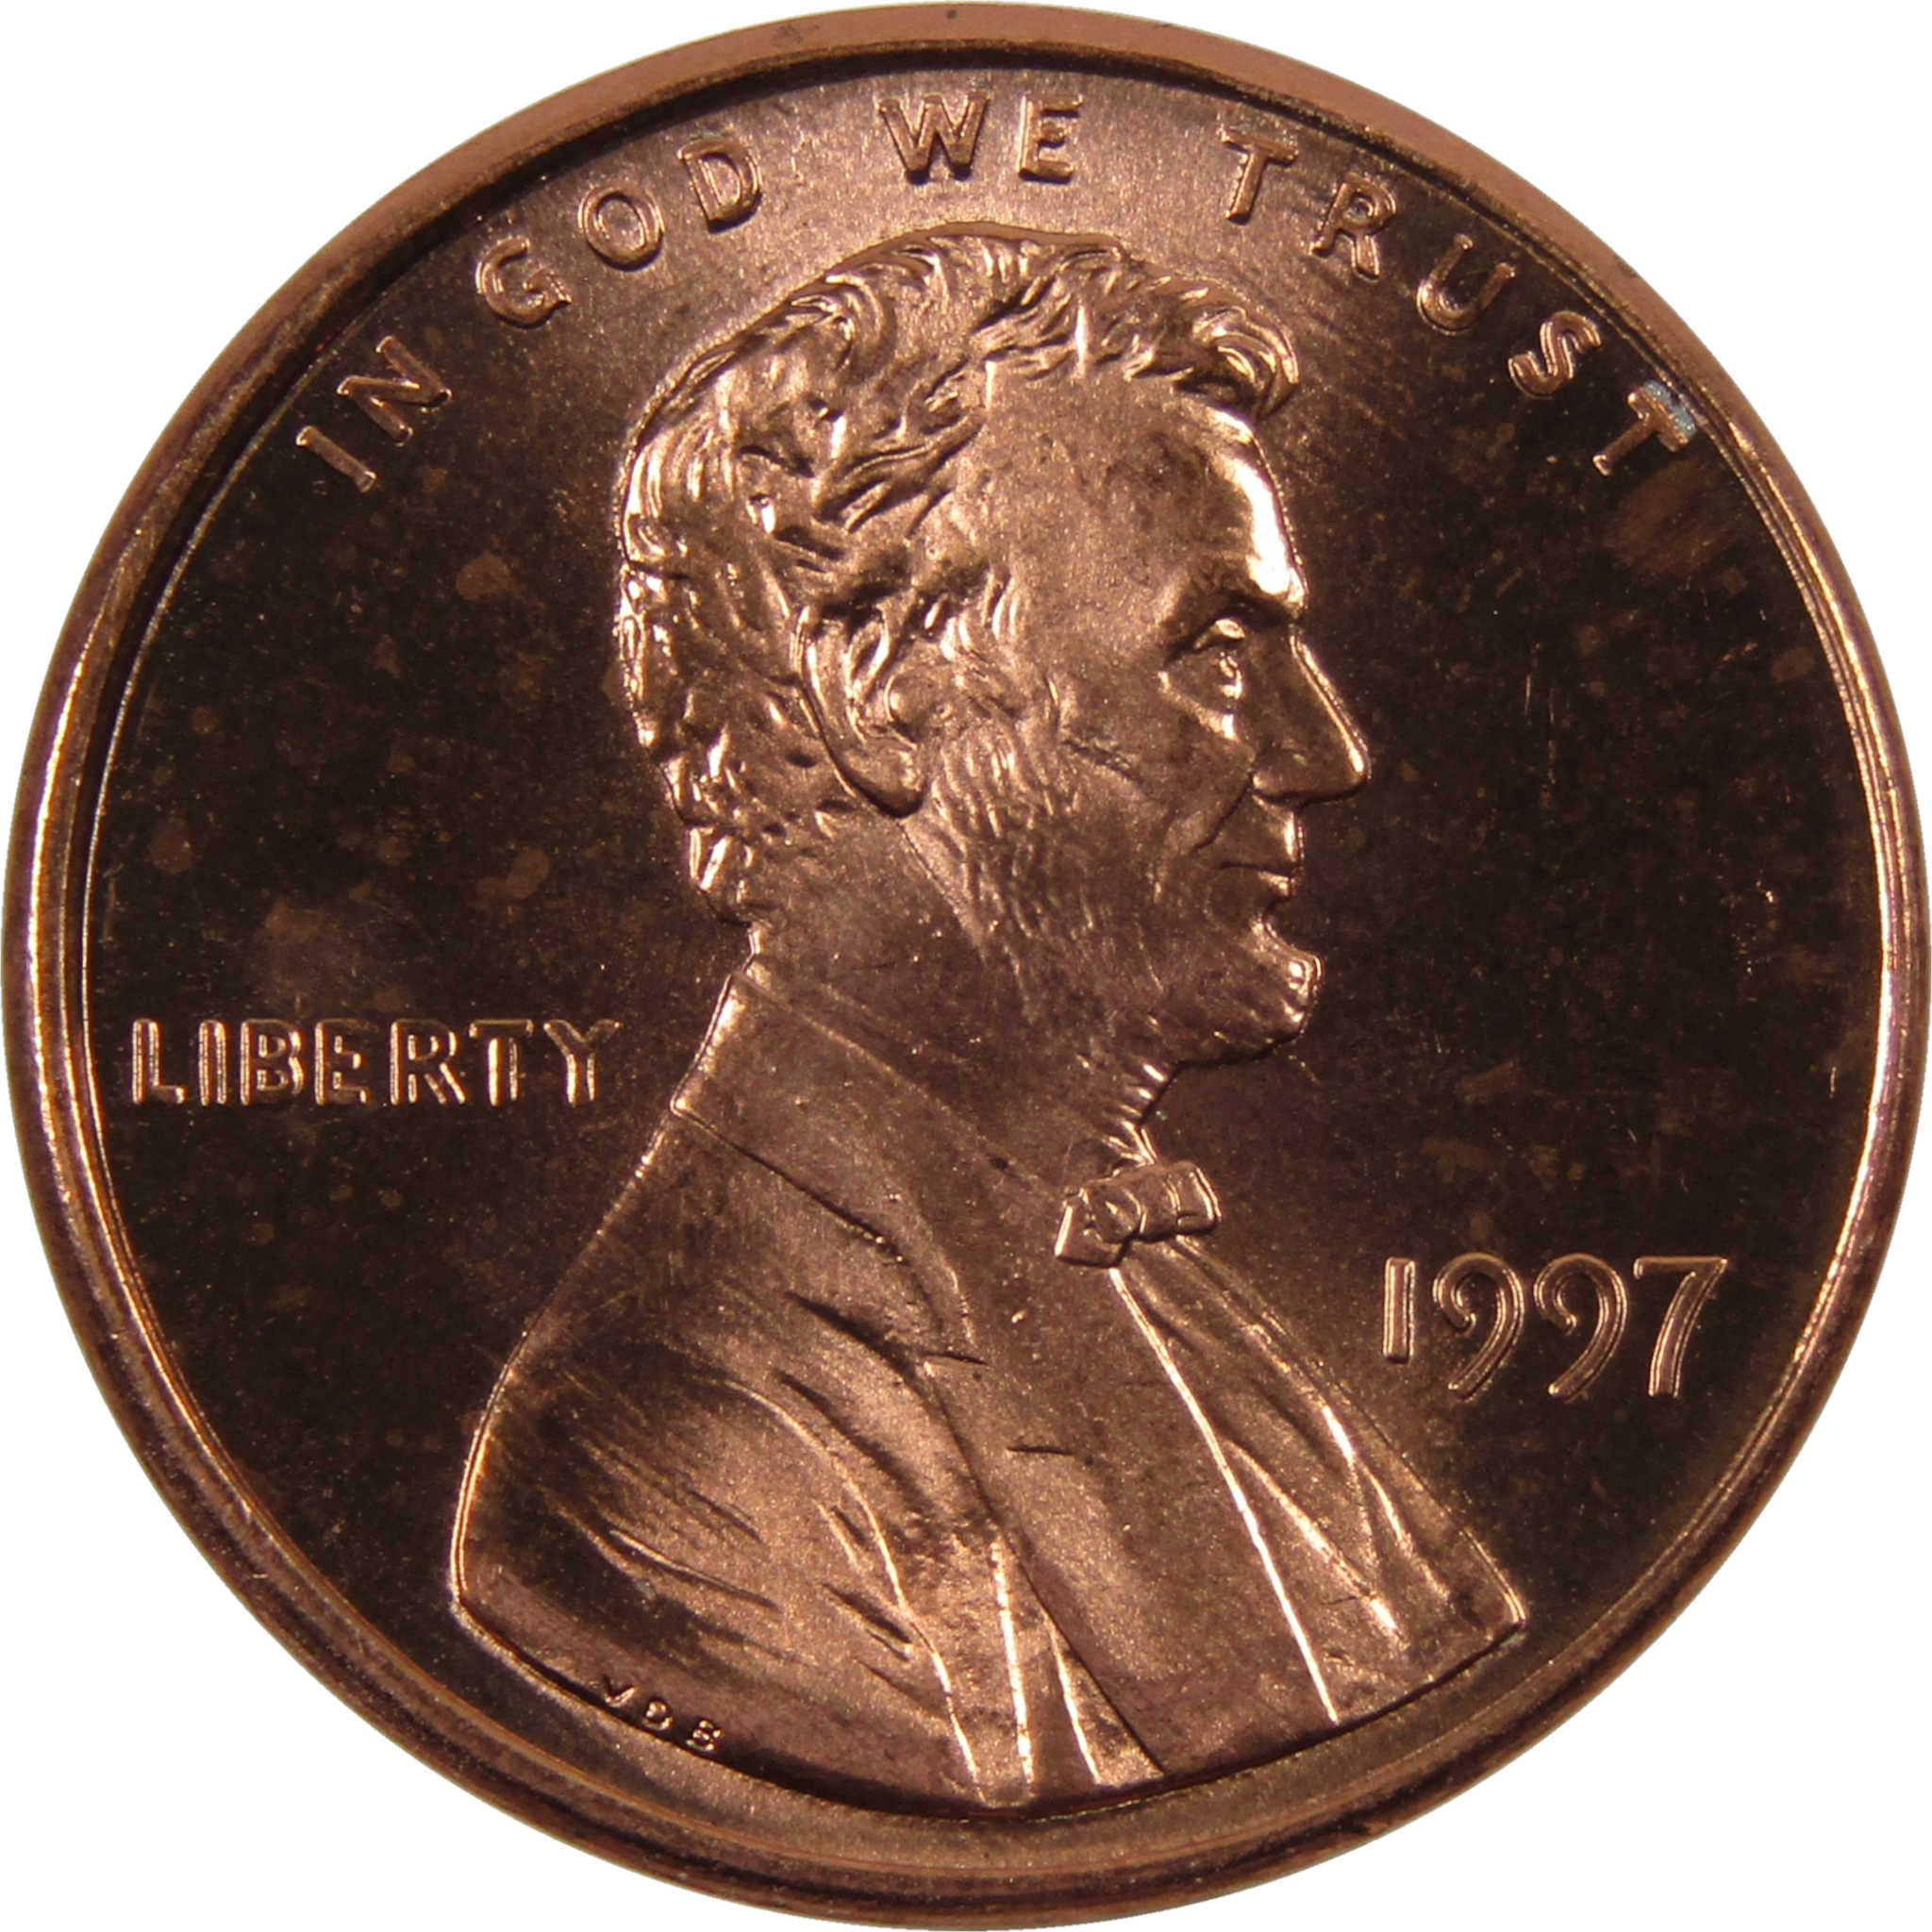 1997 Lincoln Memorial Cent BU Uncirculated Penny 1c Coin